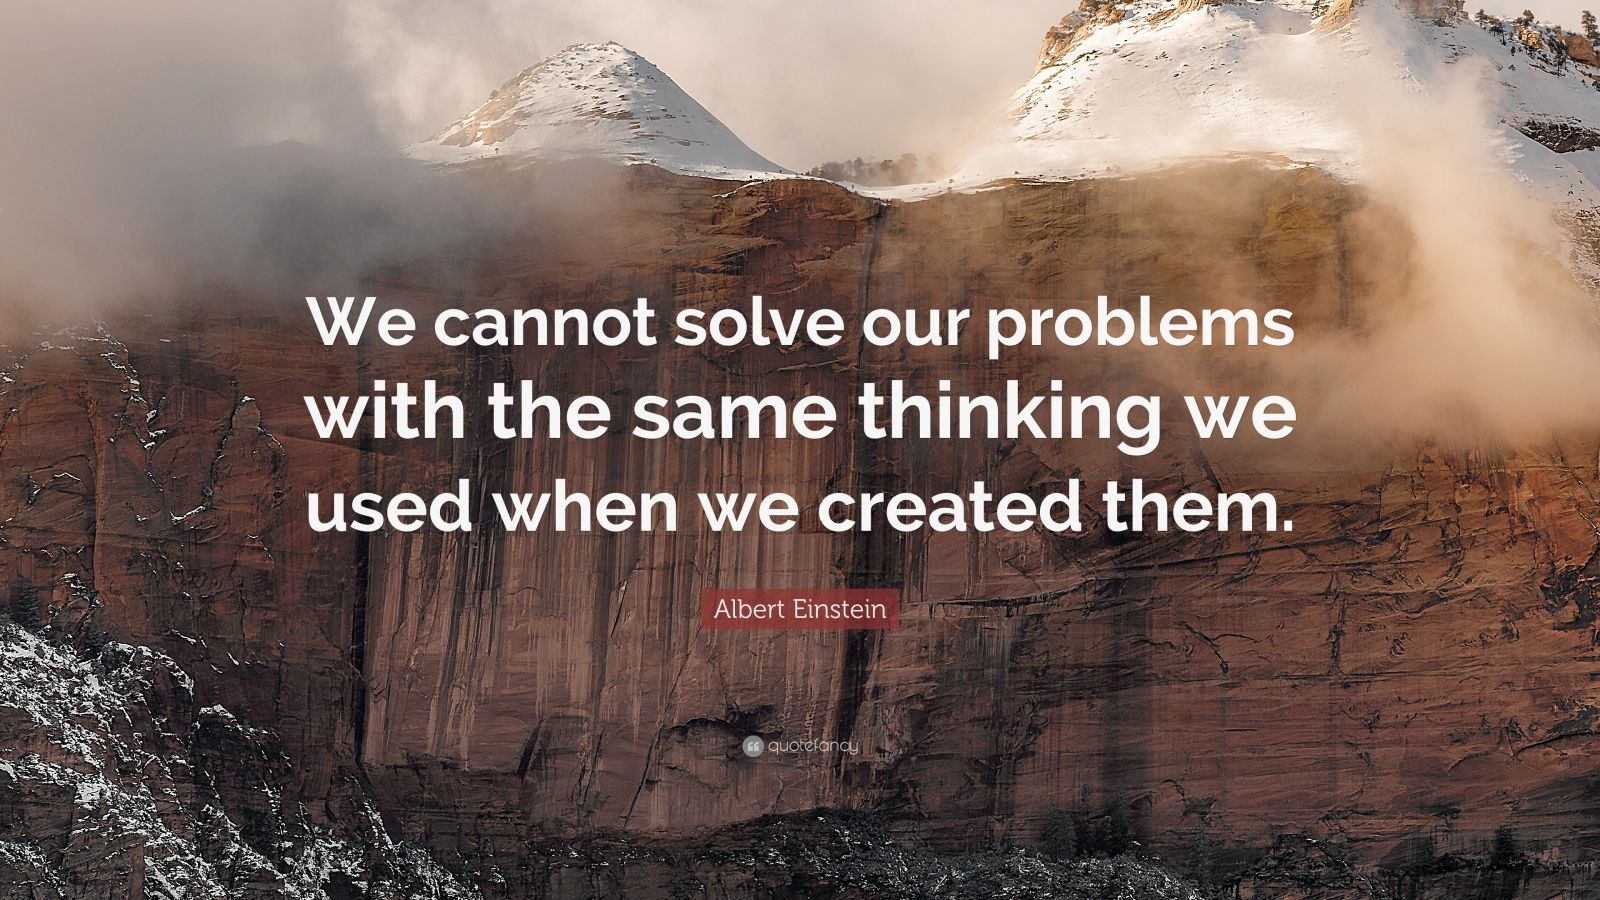 we can't solve problems by using the same kind of thinking